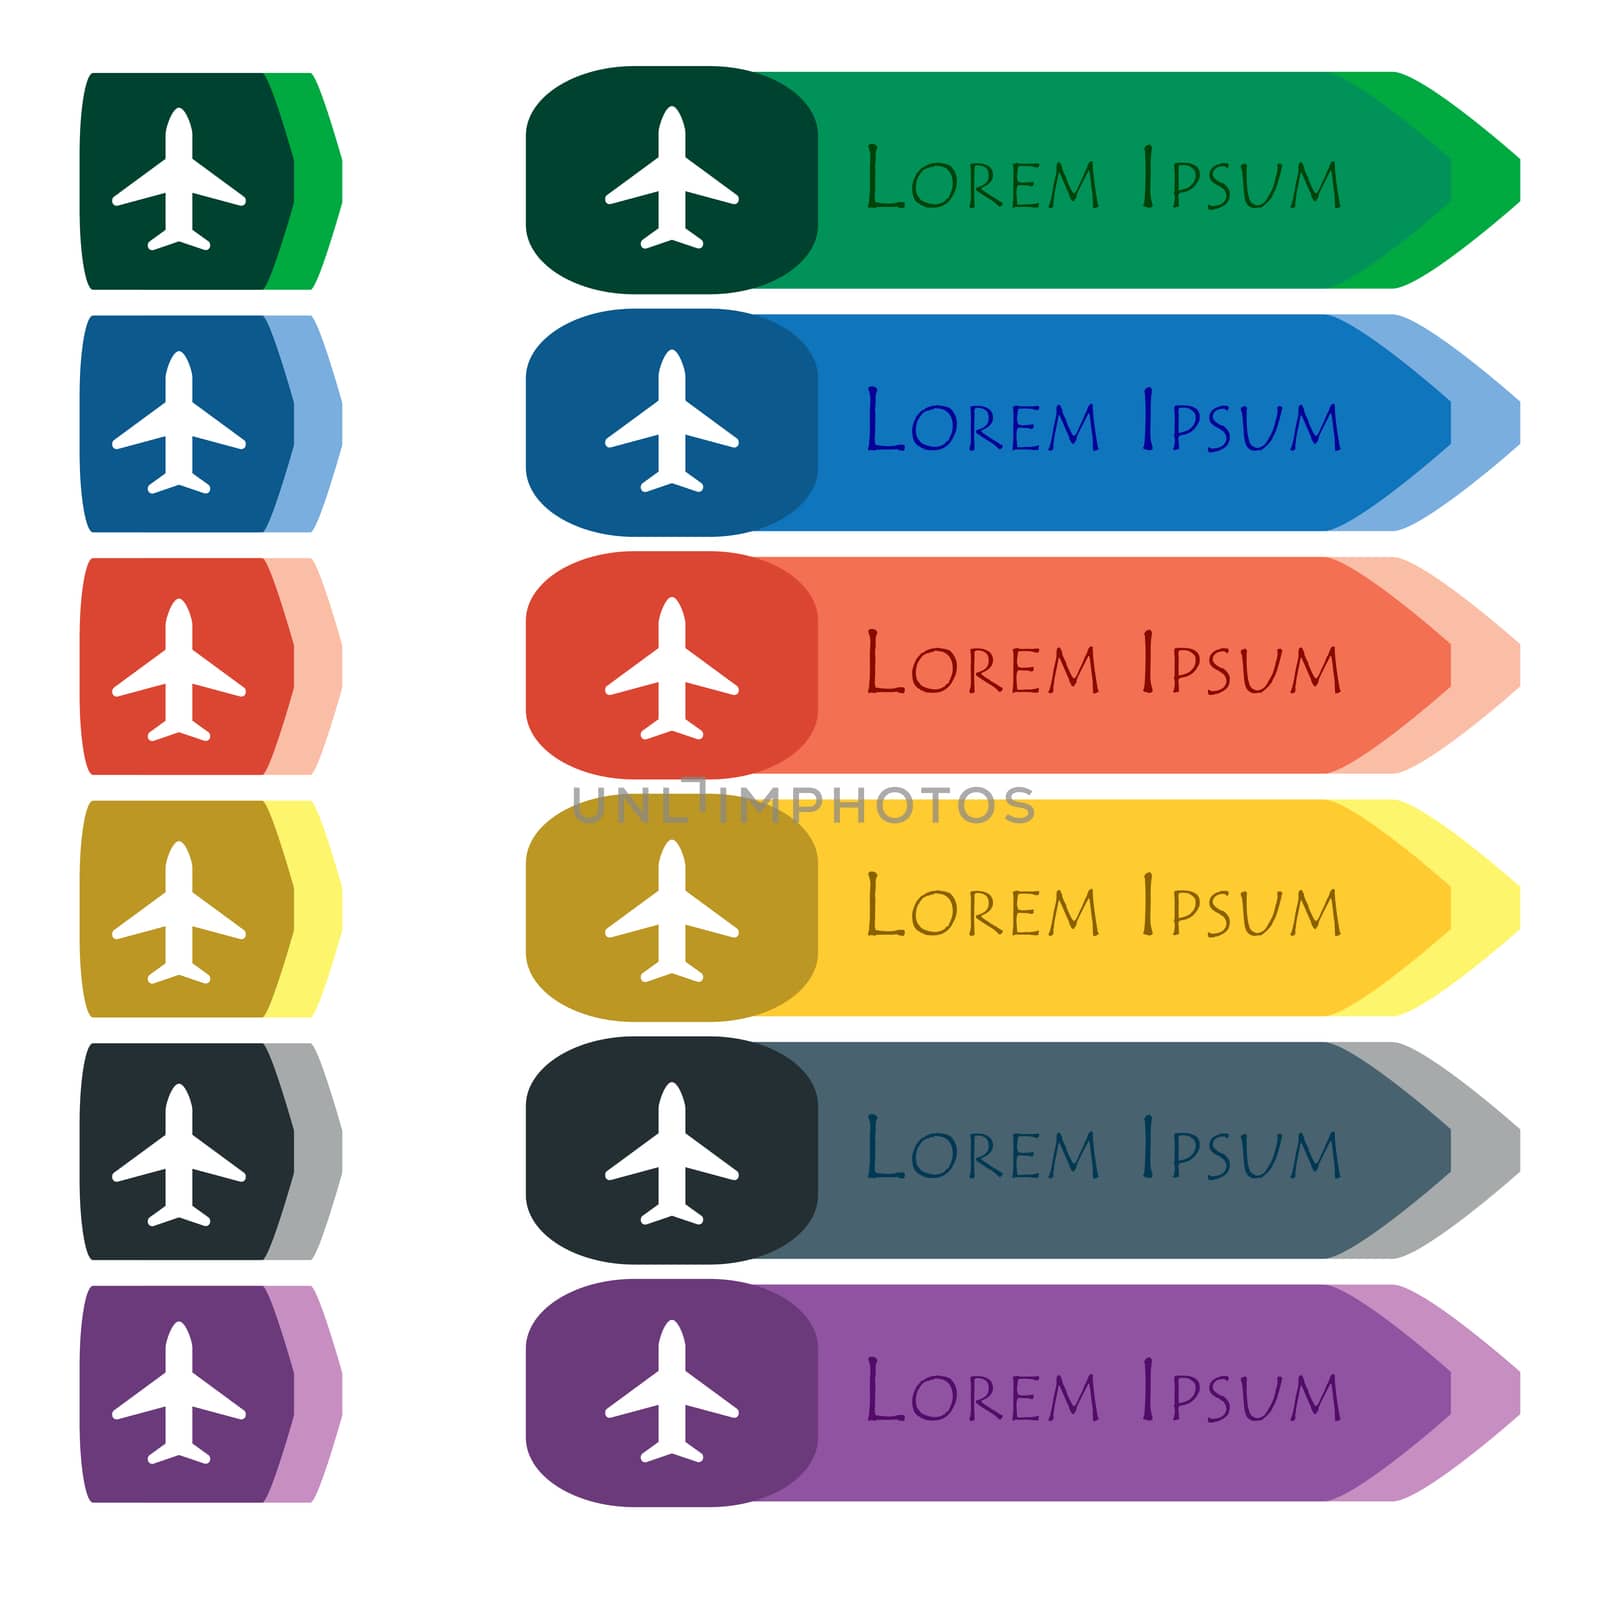 Airplane, Plane, Travel, Flight icon sign. Set of colorful, bright long buttons with additional small modules. Flat design by serhii_lohvyniuk